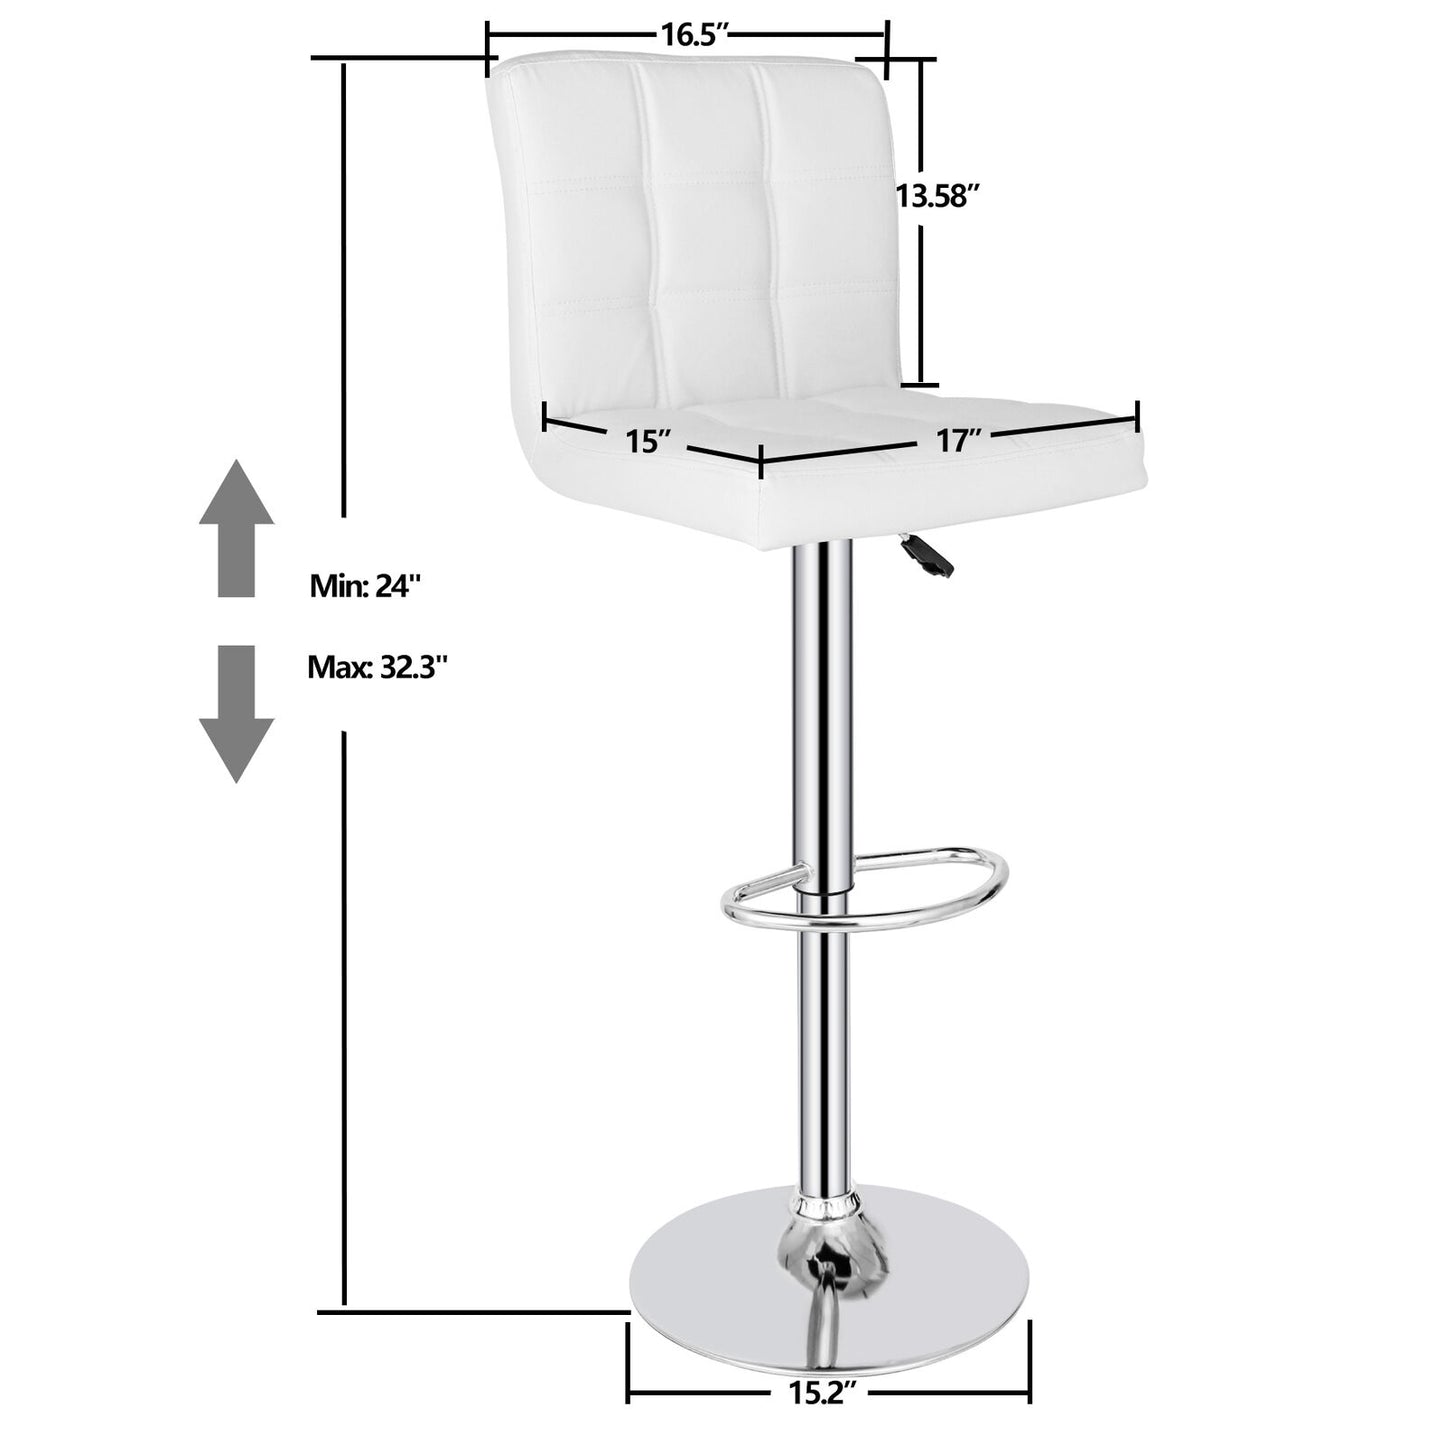 Set of 4 Adjustable Height Bar Stools PU Leather Swivel Pub Dining Chairs White